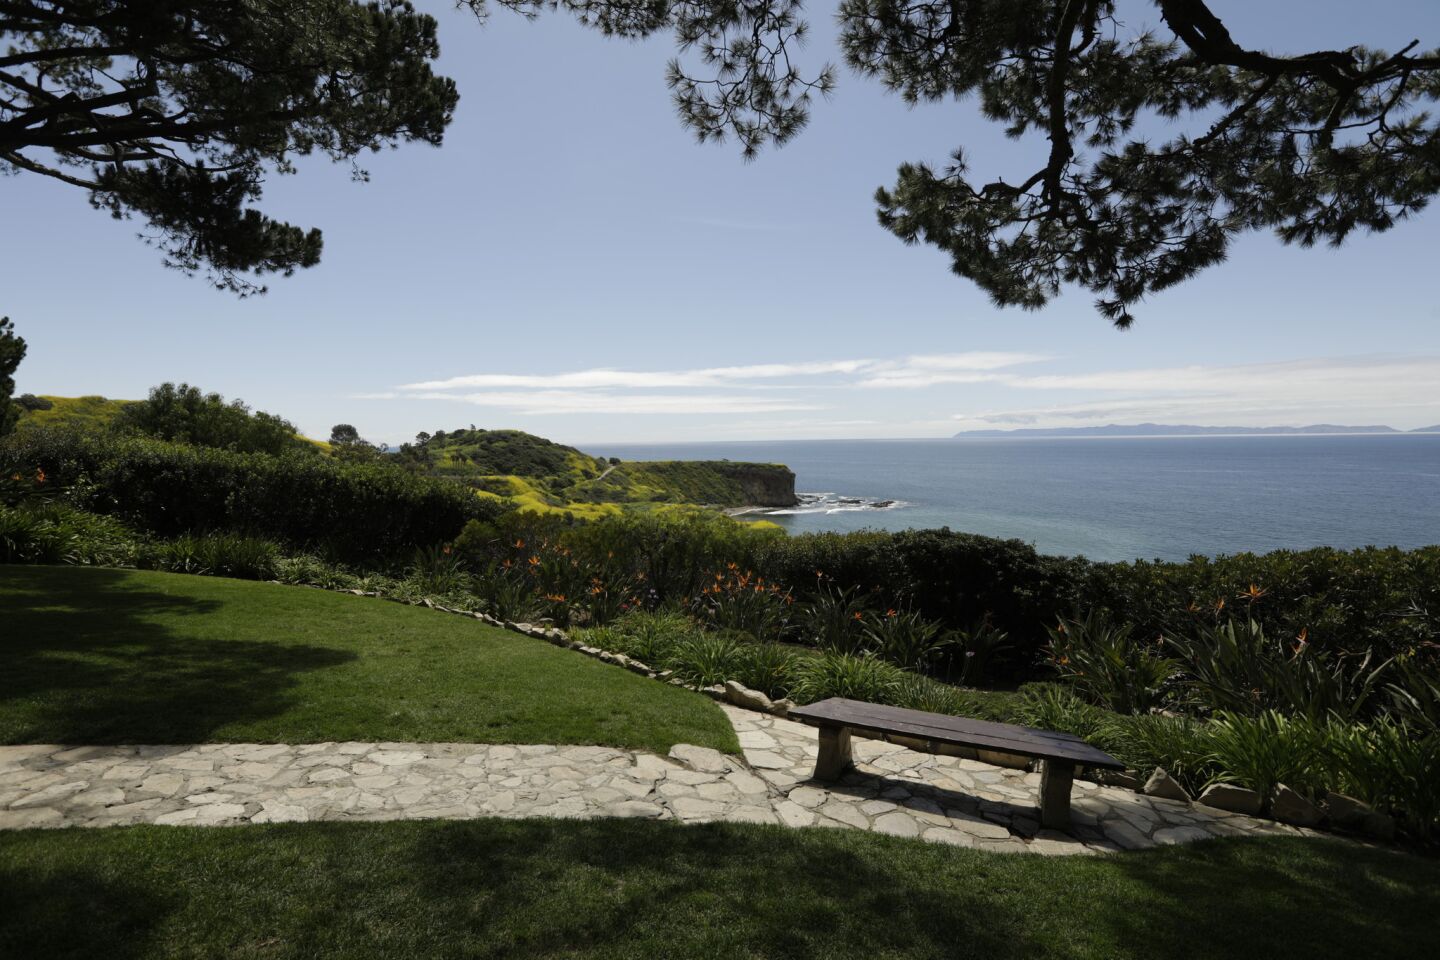 The grounds and view from Wayfarers Chapel in Rancho Palos Verdes.